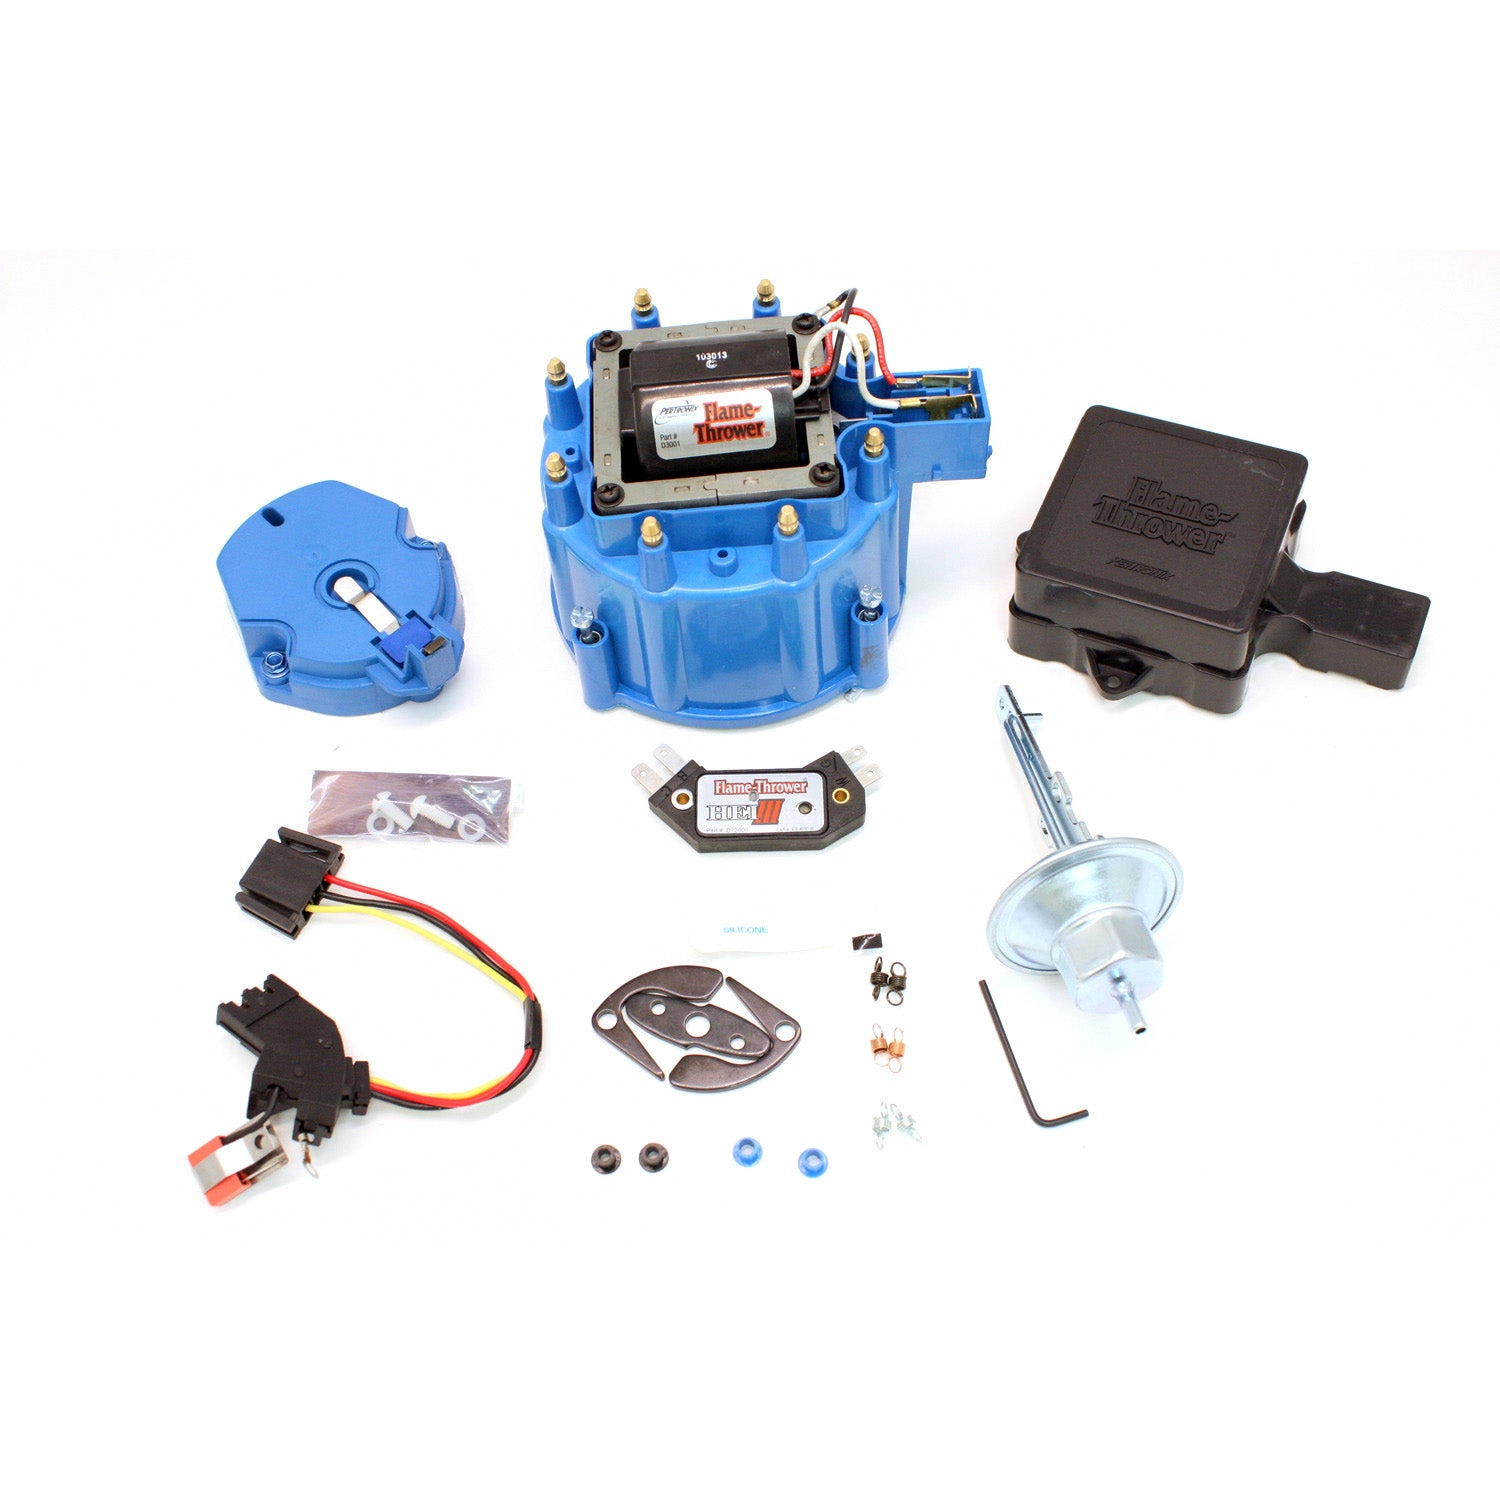 PerTronix D78012 Flame-Thrower GM HEI III Tune Up Buick/Oldsmobile/Pontiac/Corvette Kit Blue Cap with multiple sparks and an adjustable digital rev limiter